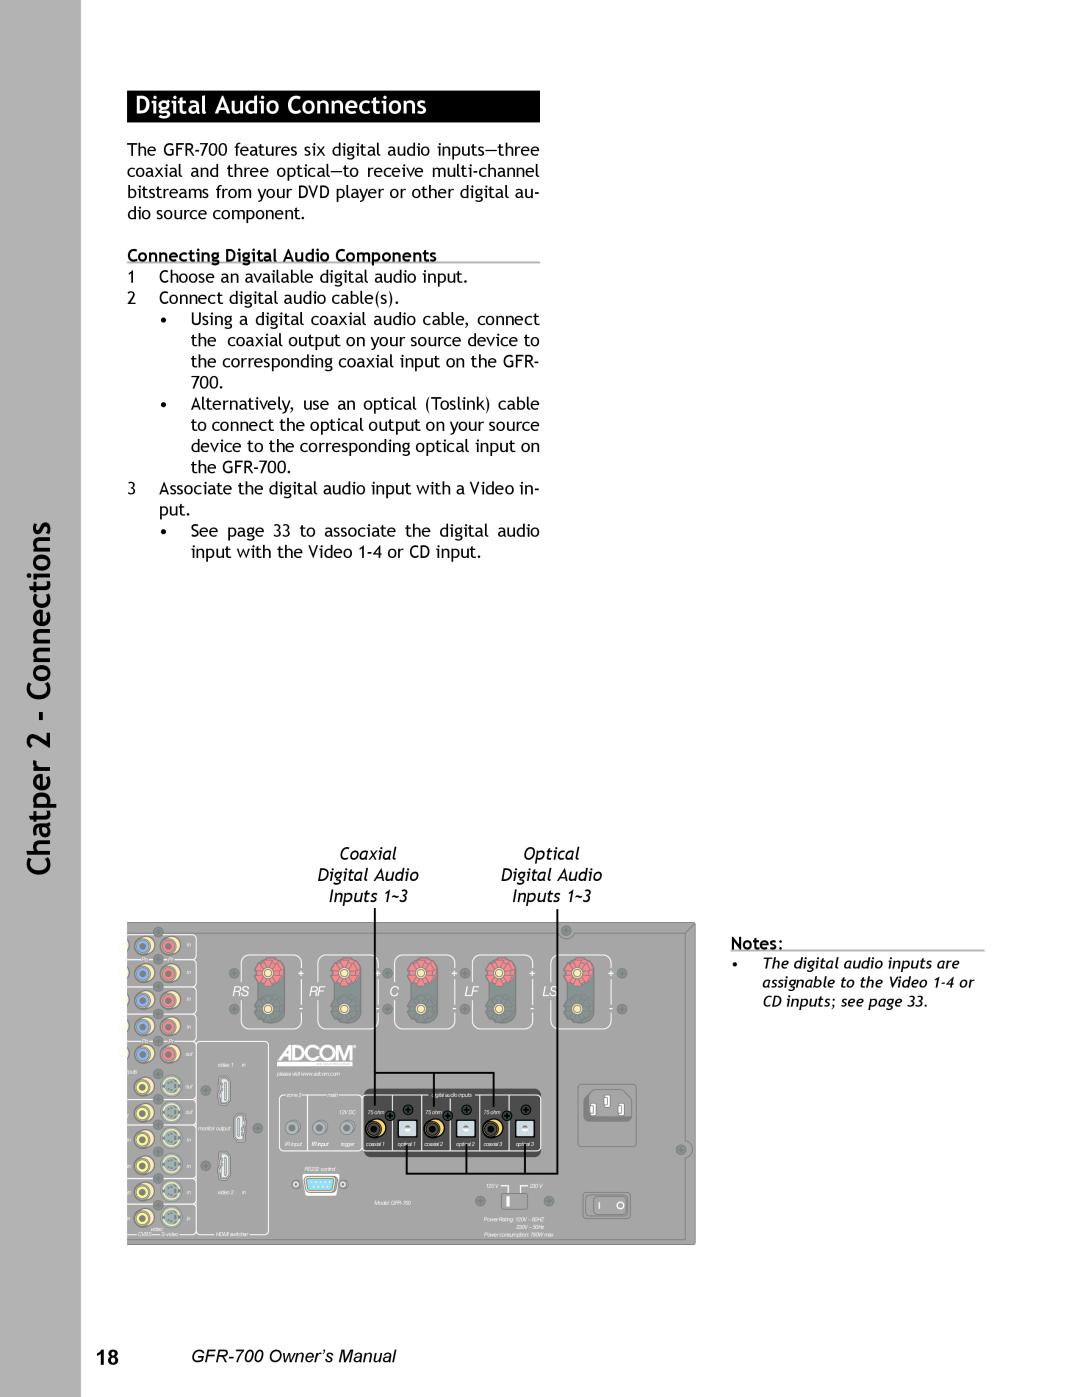 Adcom GFR-700 Digital Audio Connections, Connecting Digital Audio Components, Coaxial, Optical, Chatper 2 - Connections 